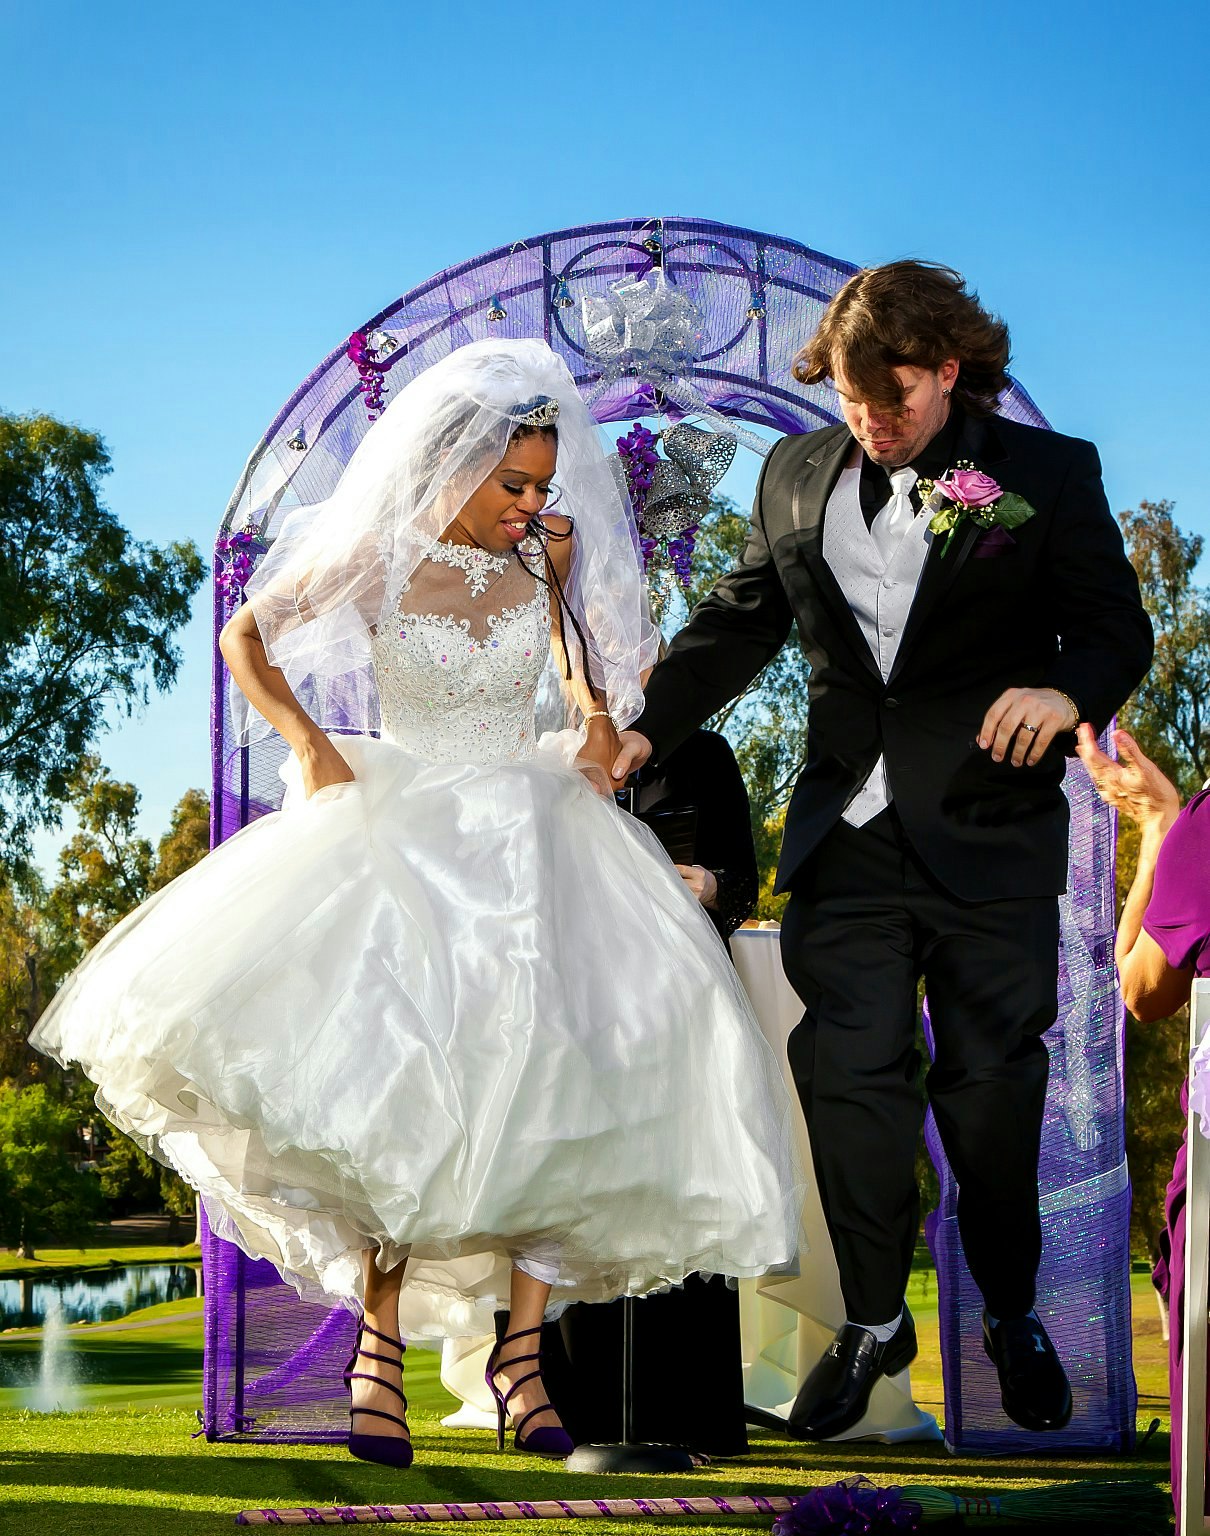 A bride and groom jump over a broom at their wedding ceremony in the USA.